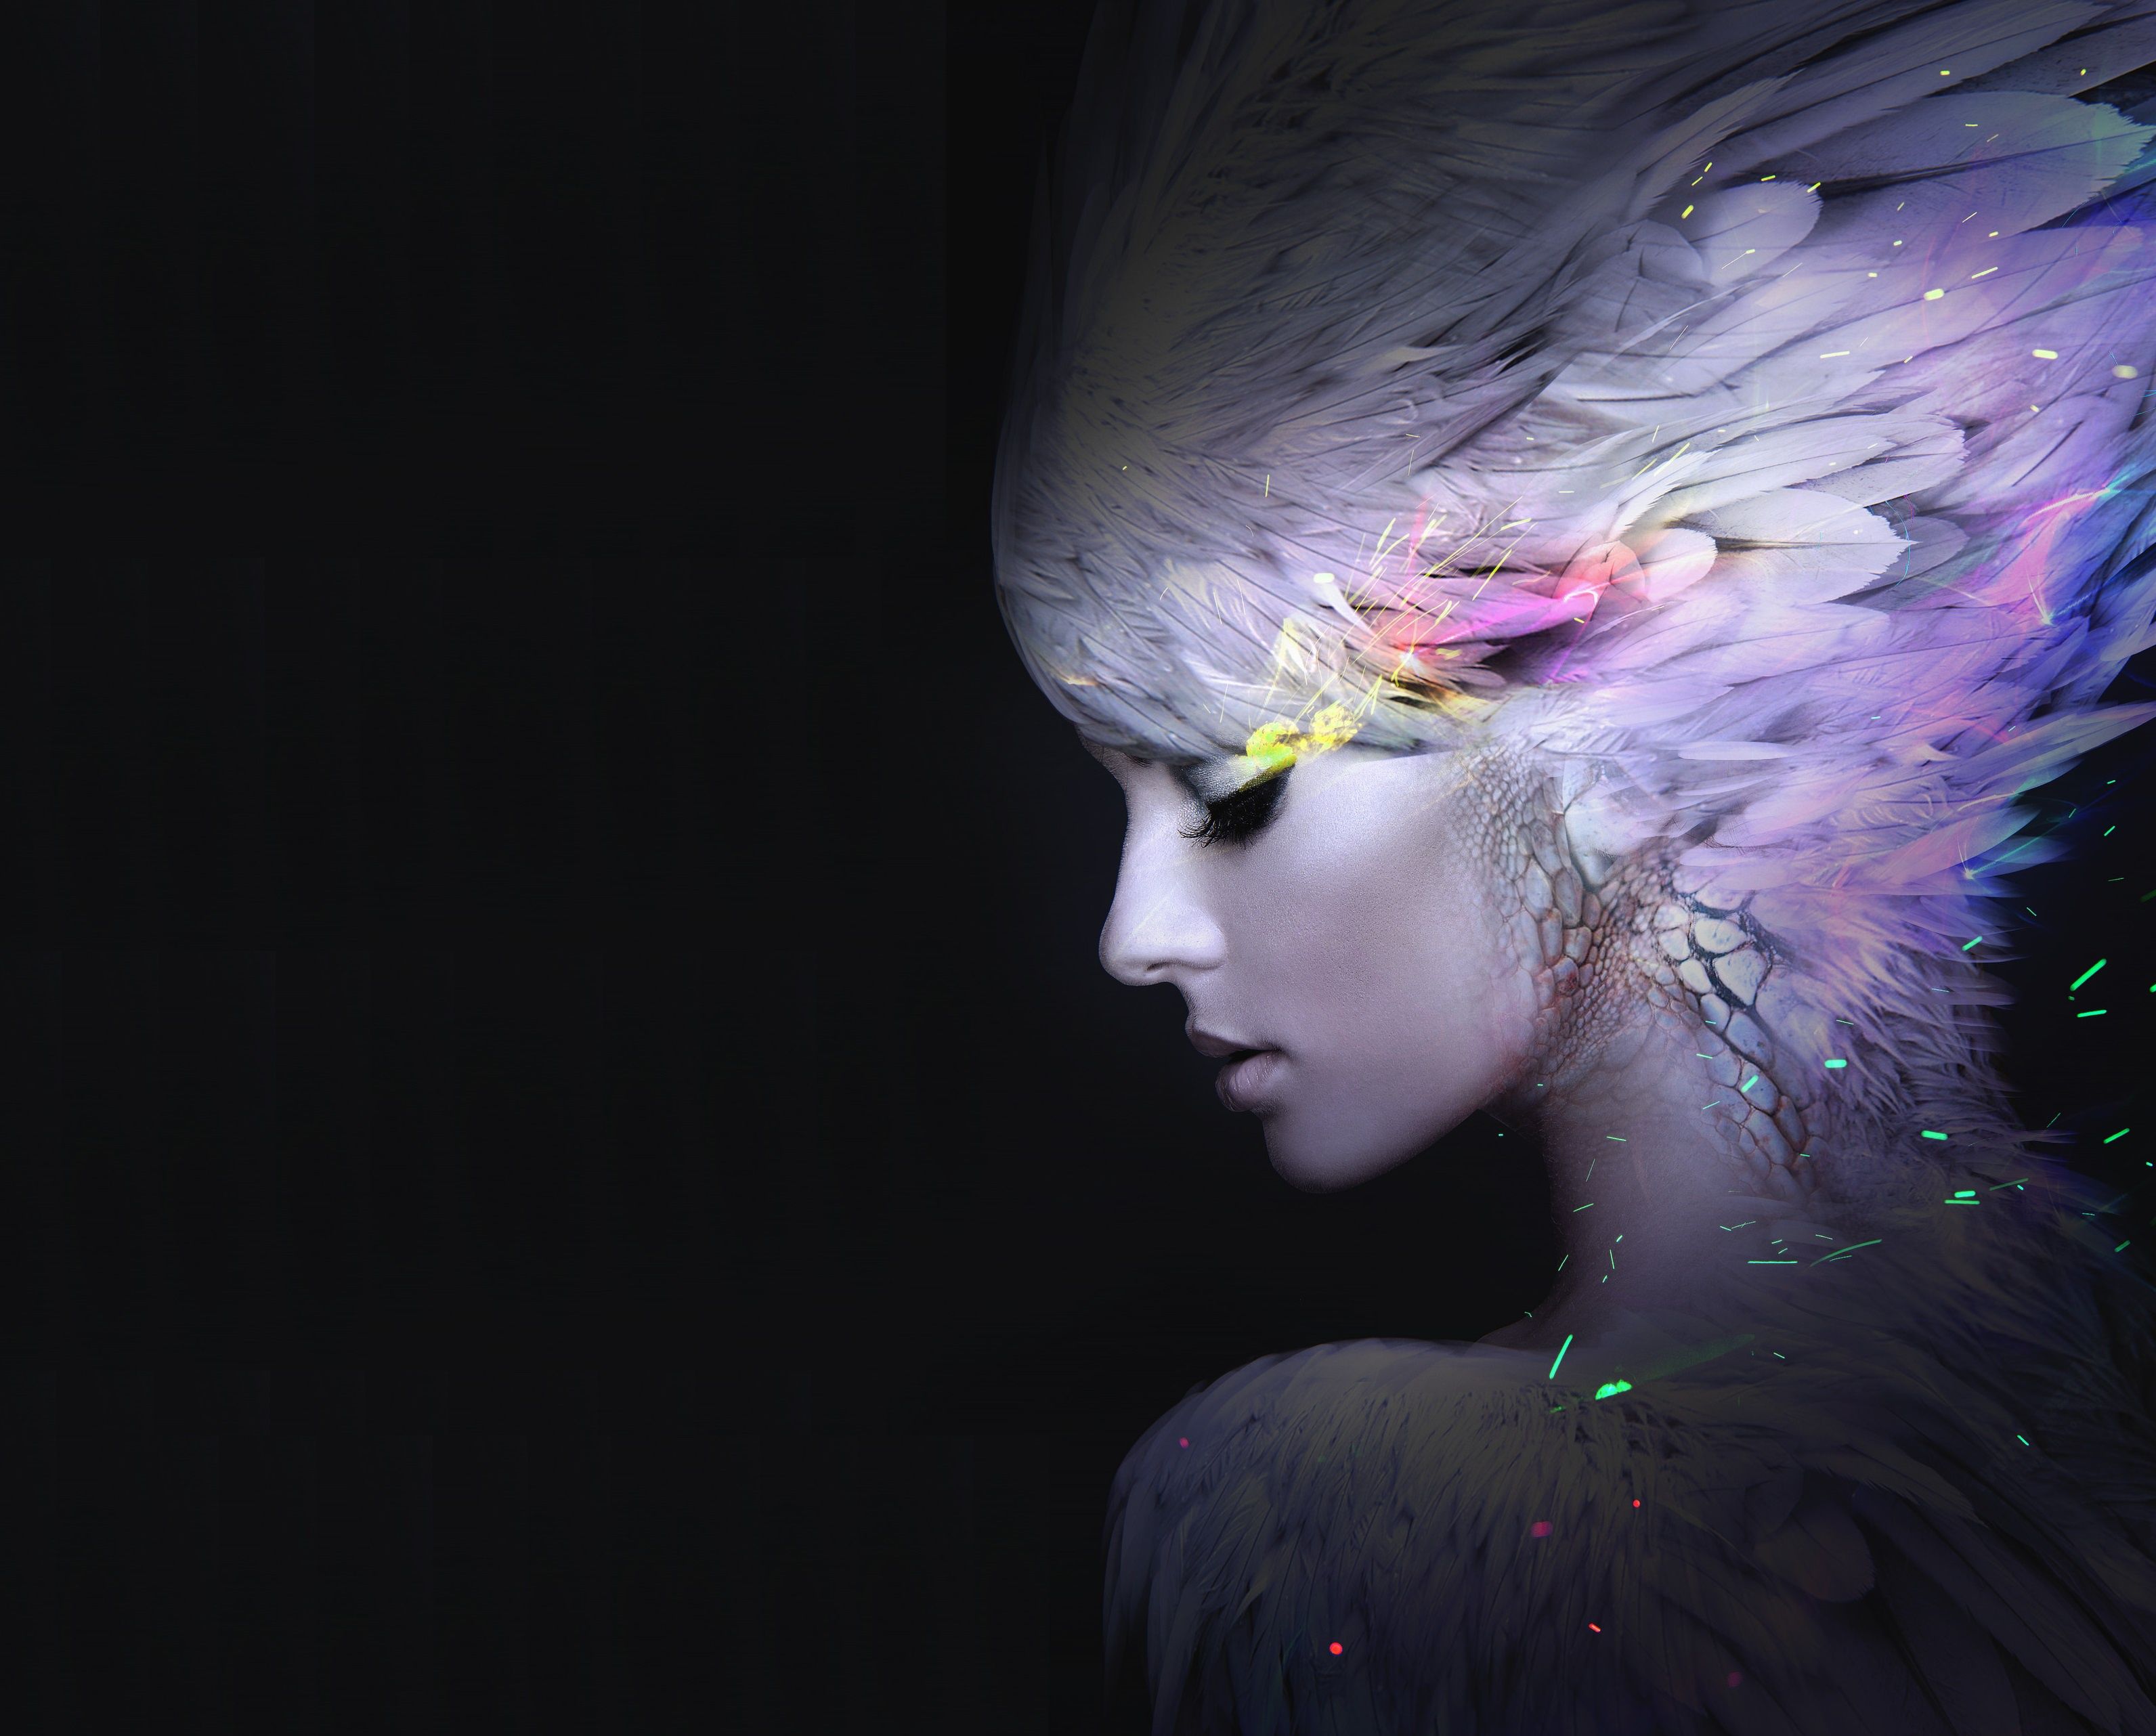 Women Artistic Woman Girl Feather Makeup Fantasy HD Wallpaper Background Image